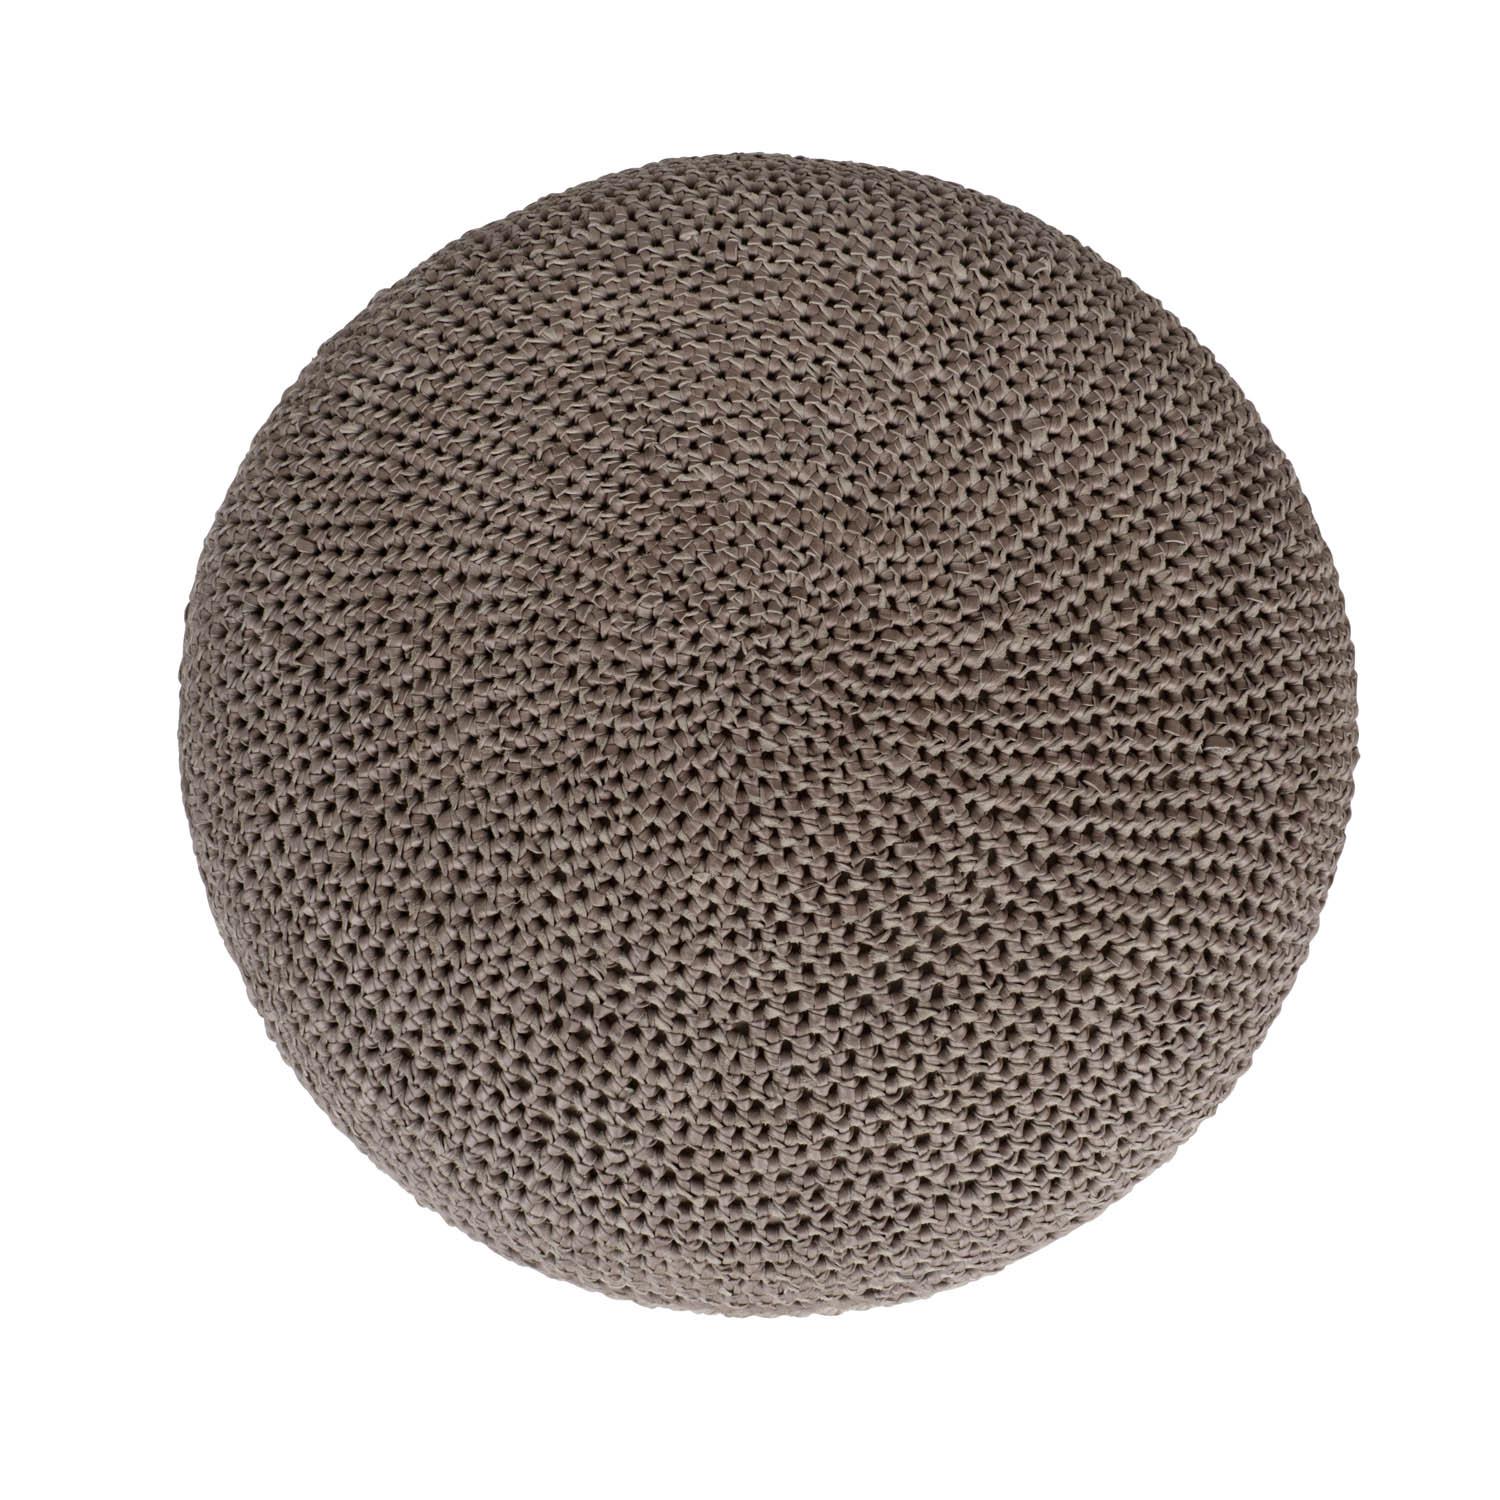 Crocheted Leather Round Ottoman on Brass Base